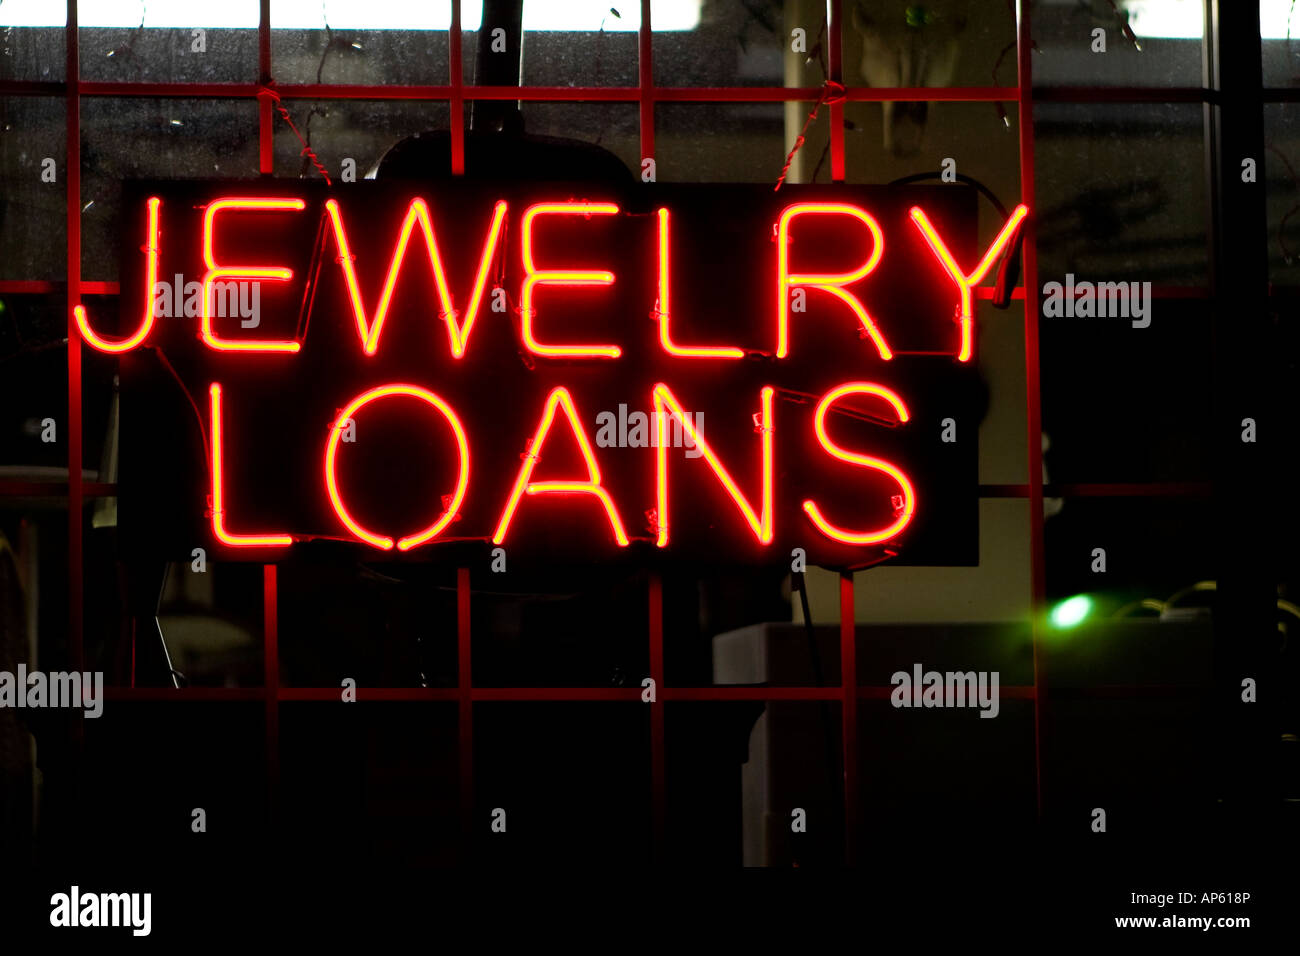 Jewelry Loans Neon Sign Stock Photo